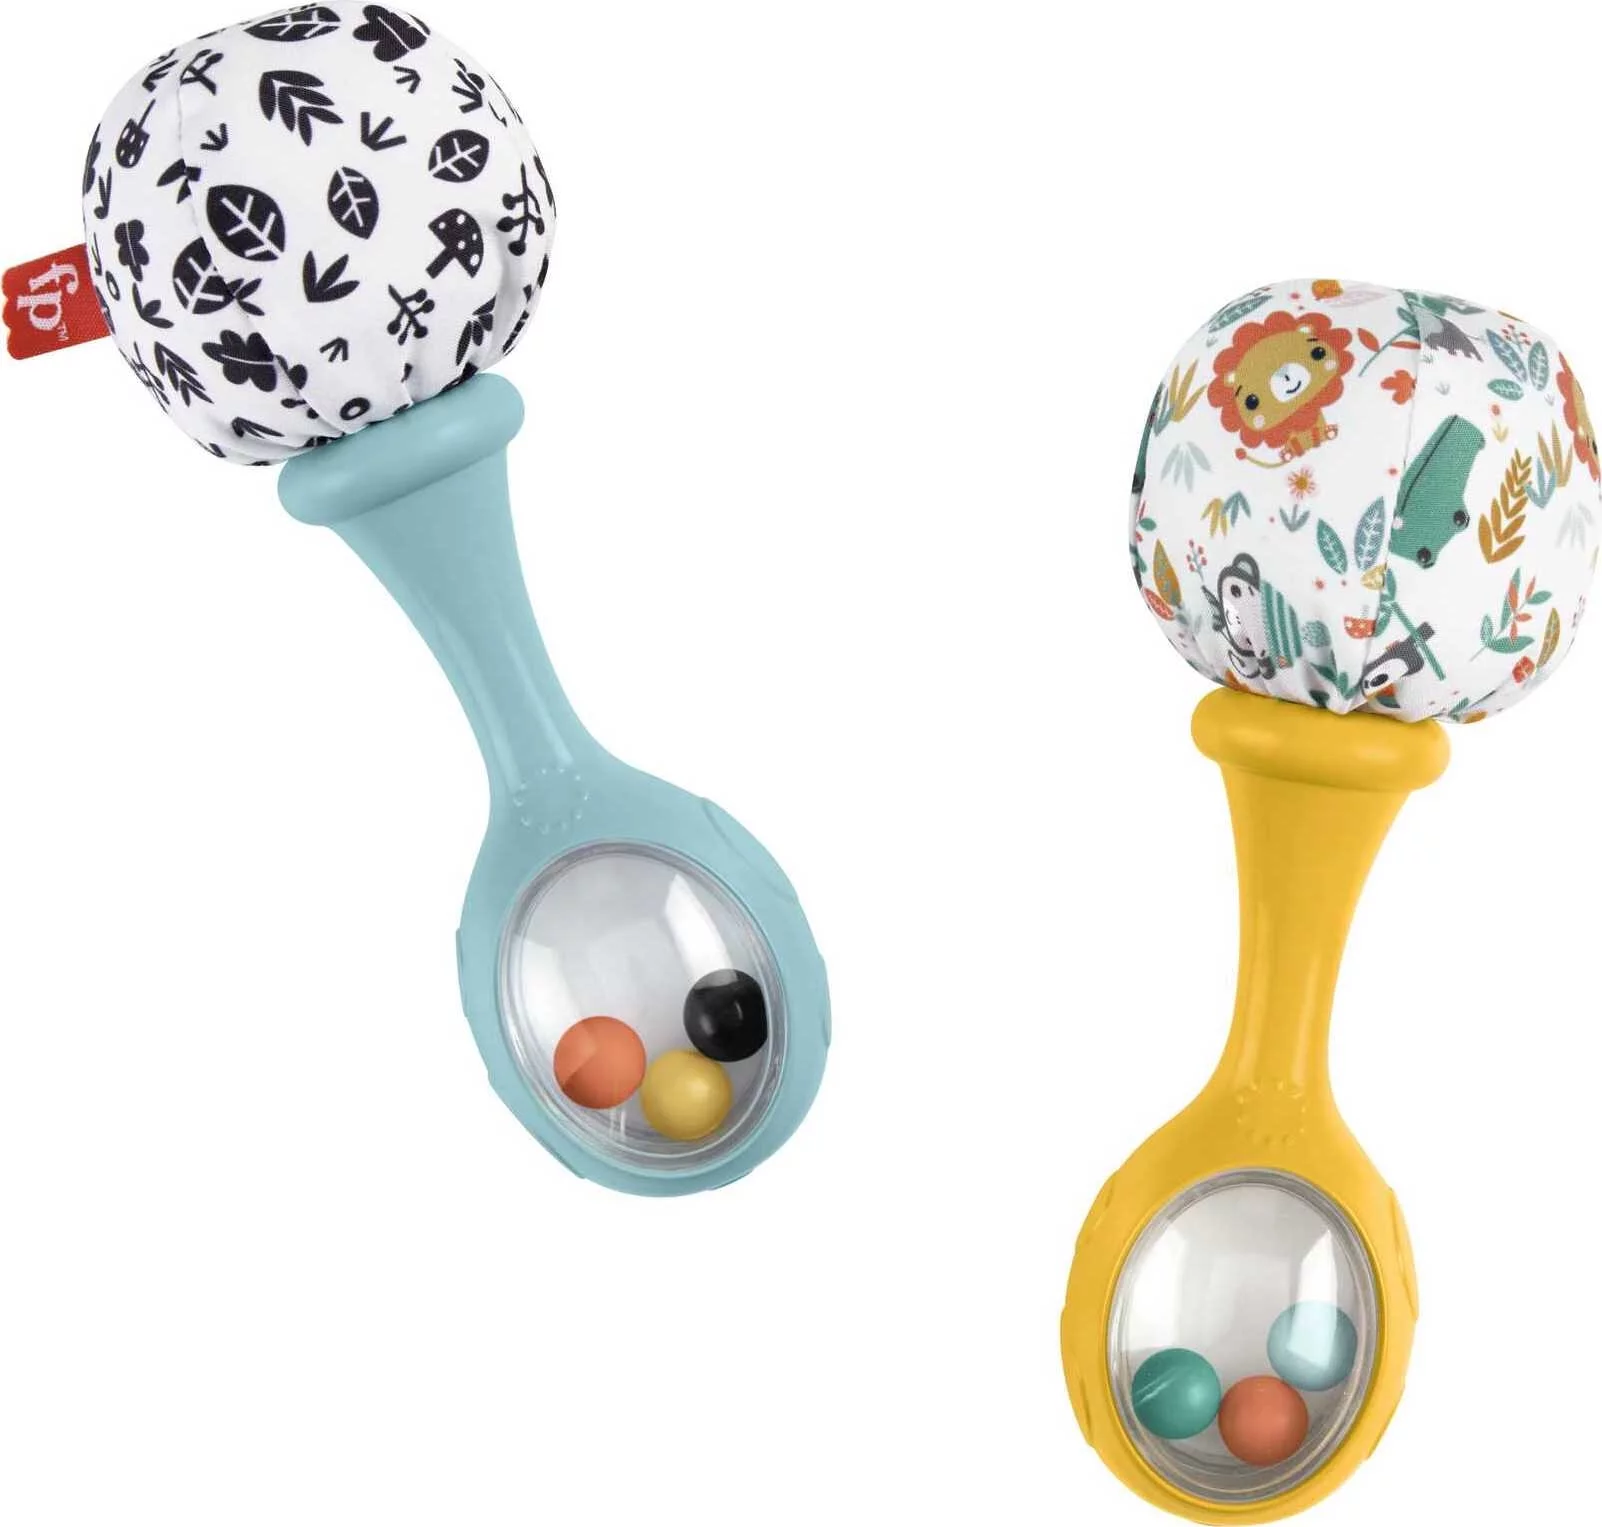 Fisher-Price Baby Rattle ‘n Rock Maracas Toys, Set of 2 for Infants 3+ Months, High Contrast